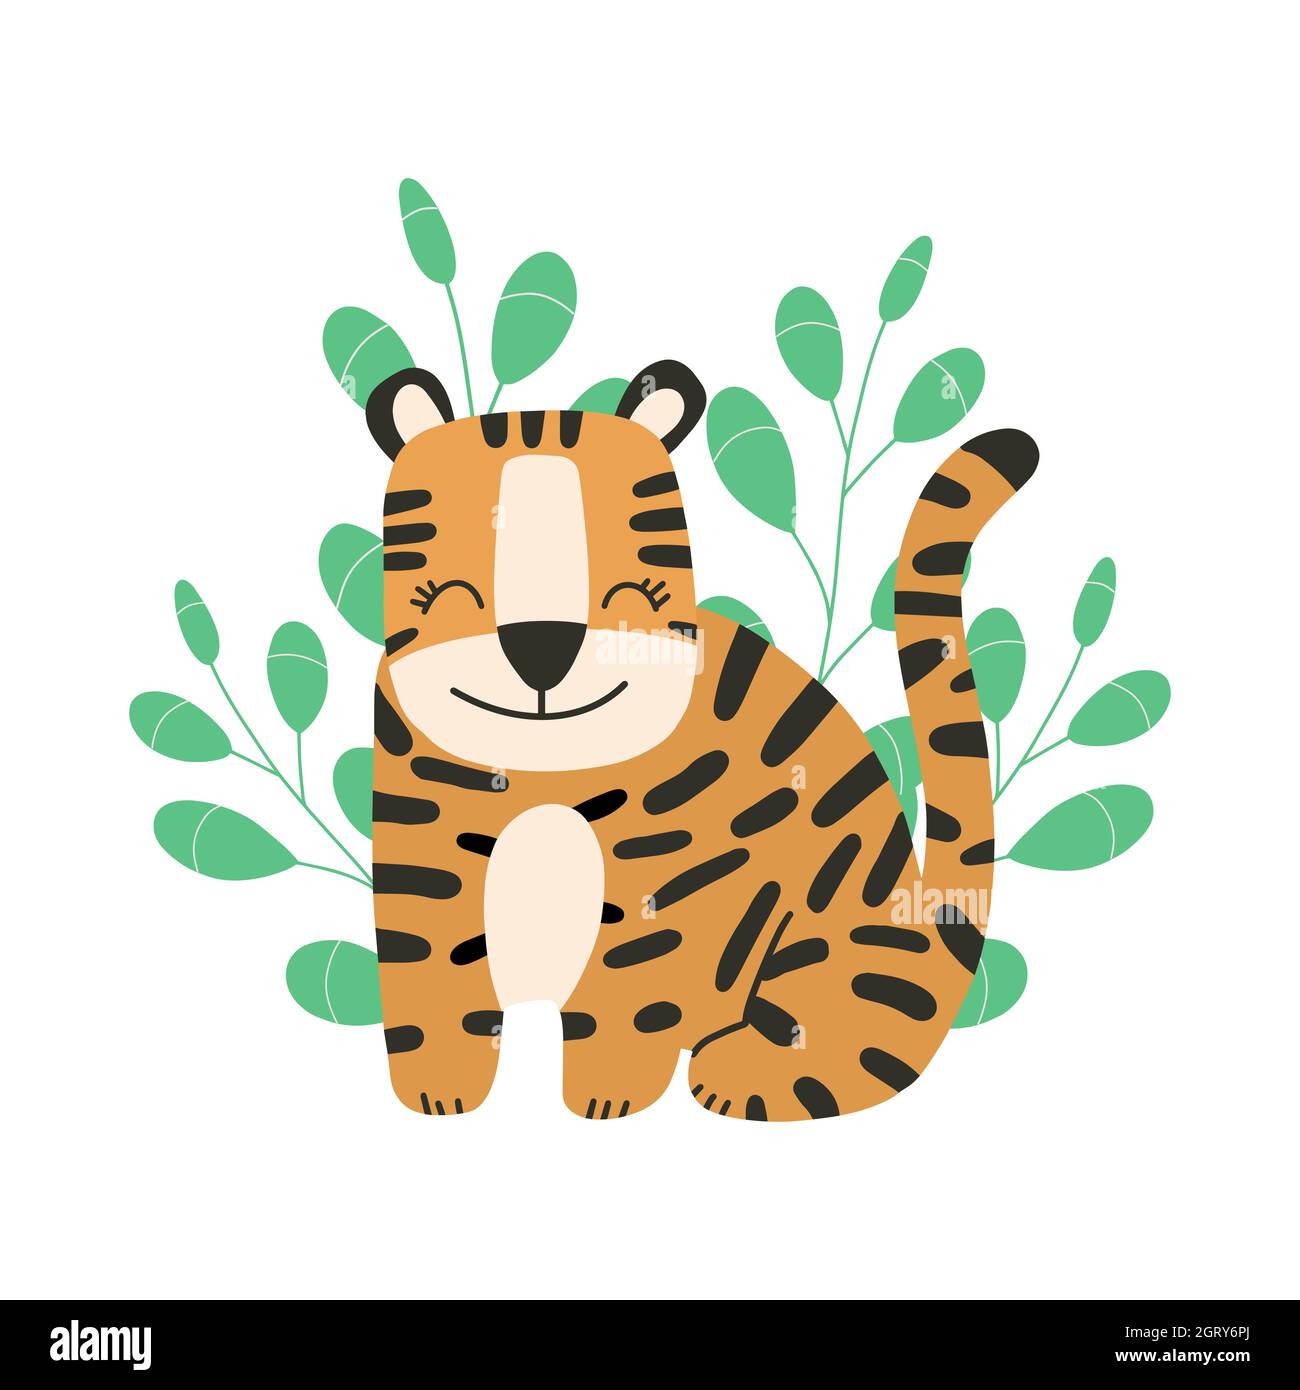 Cute little tiger. Chinese 2022 year symbol. Year of tiger. Decorative cute backdrop, good for printing.Cartoon animal Stock Vector